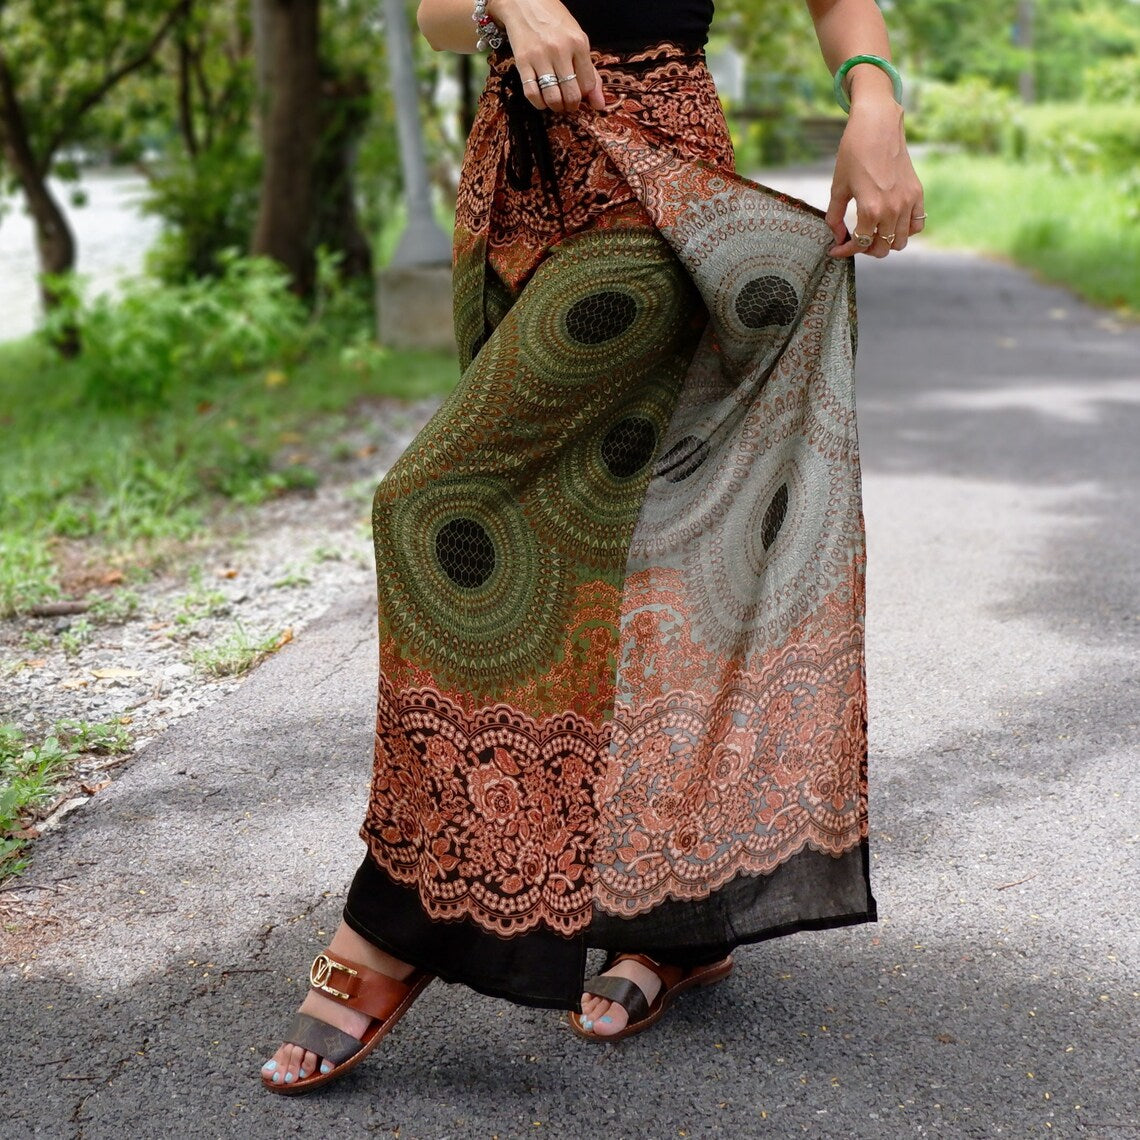 Stylish boho beach wrap pants with green-orange patterns and brown sandals on a garden path.